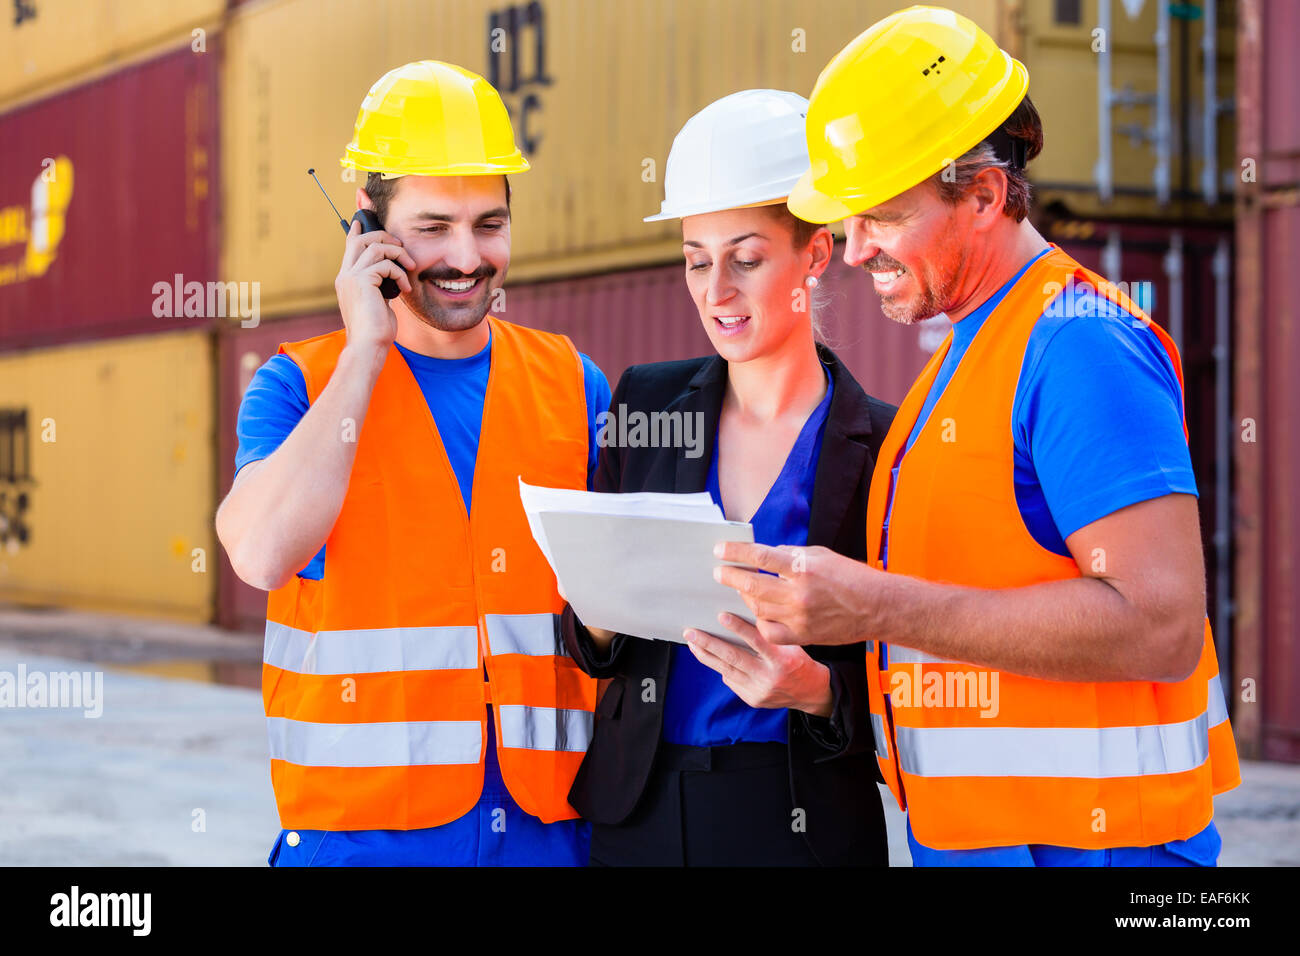 Worker and manager of shipment company discussing freight or shipment documents, one man is using phone or walkie-talkie Stock Photo